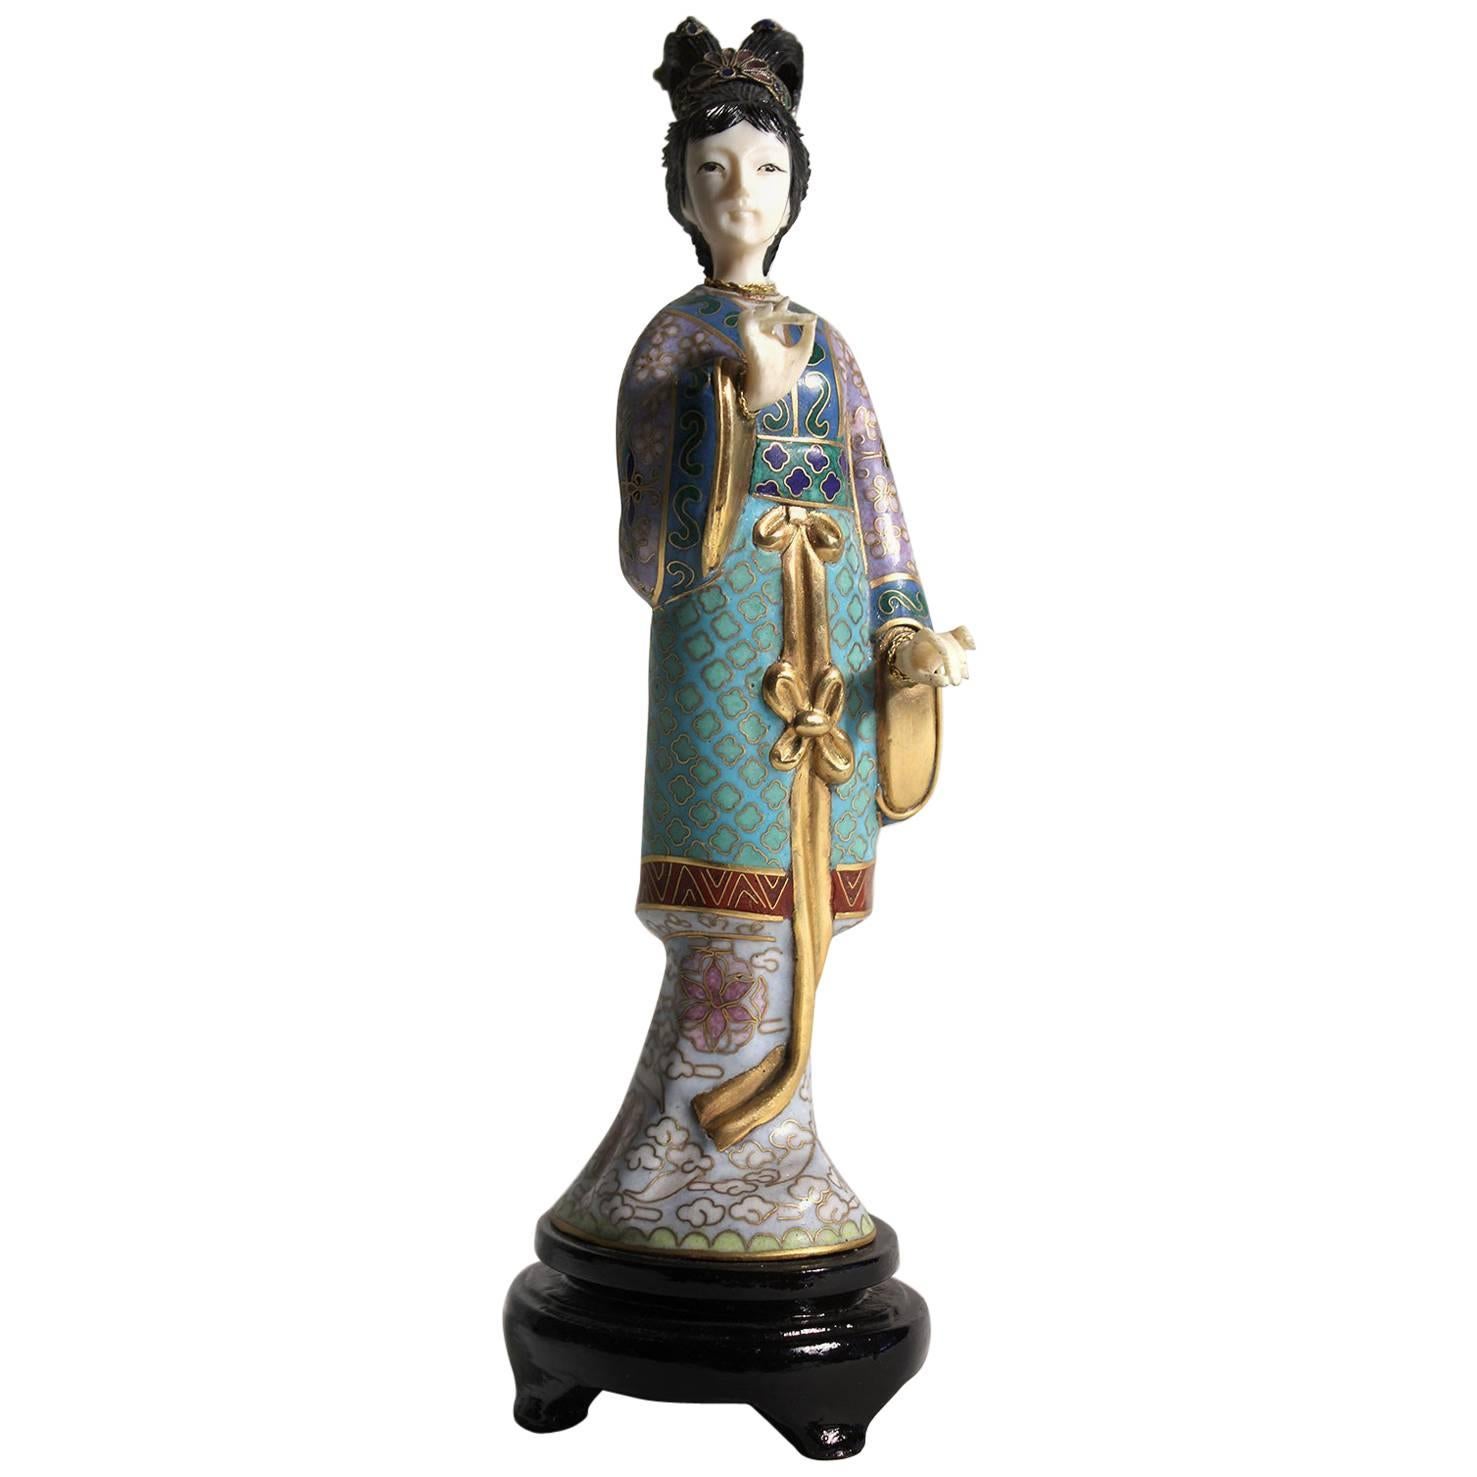 Antique Chinese Cloisonne Enameled Carved Guanyin Quan Yin Sculpture Figurine For Sale